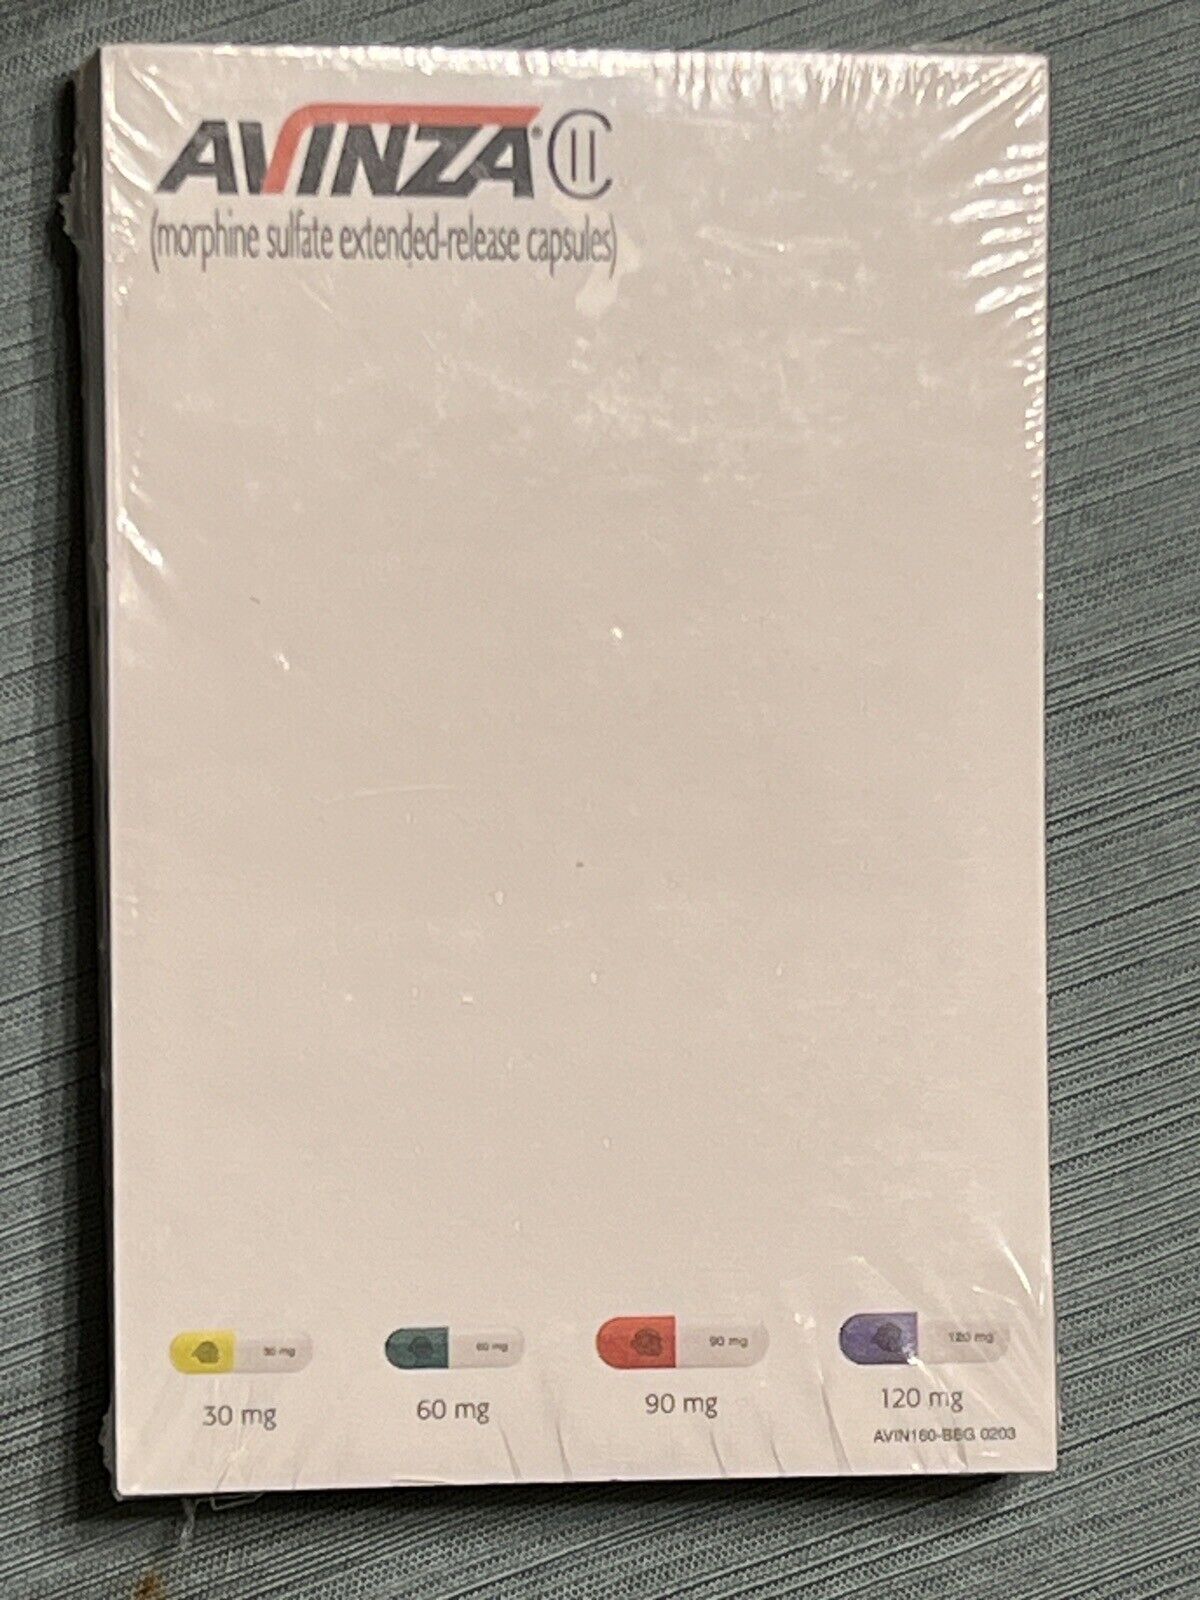 Avinza Morphine Sulfate Drug Rep Notebooks 5 Sealed in Package 500 pages approx